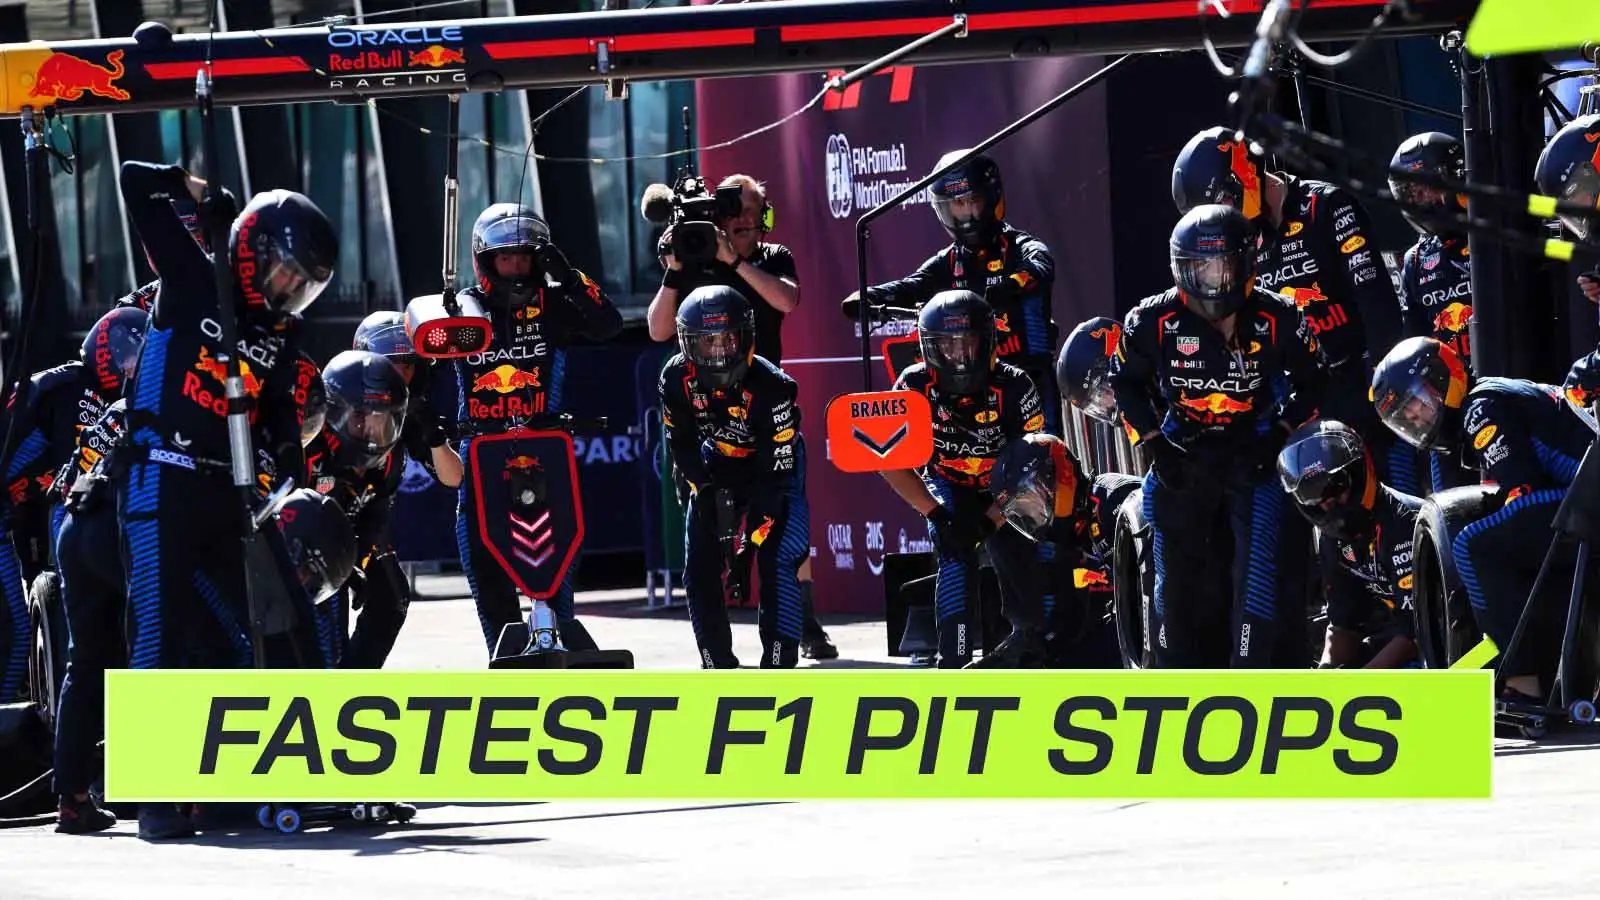 Fastest F1 pit stops: Red Bull top Imola standings but Mercedes score most points